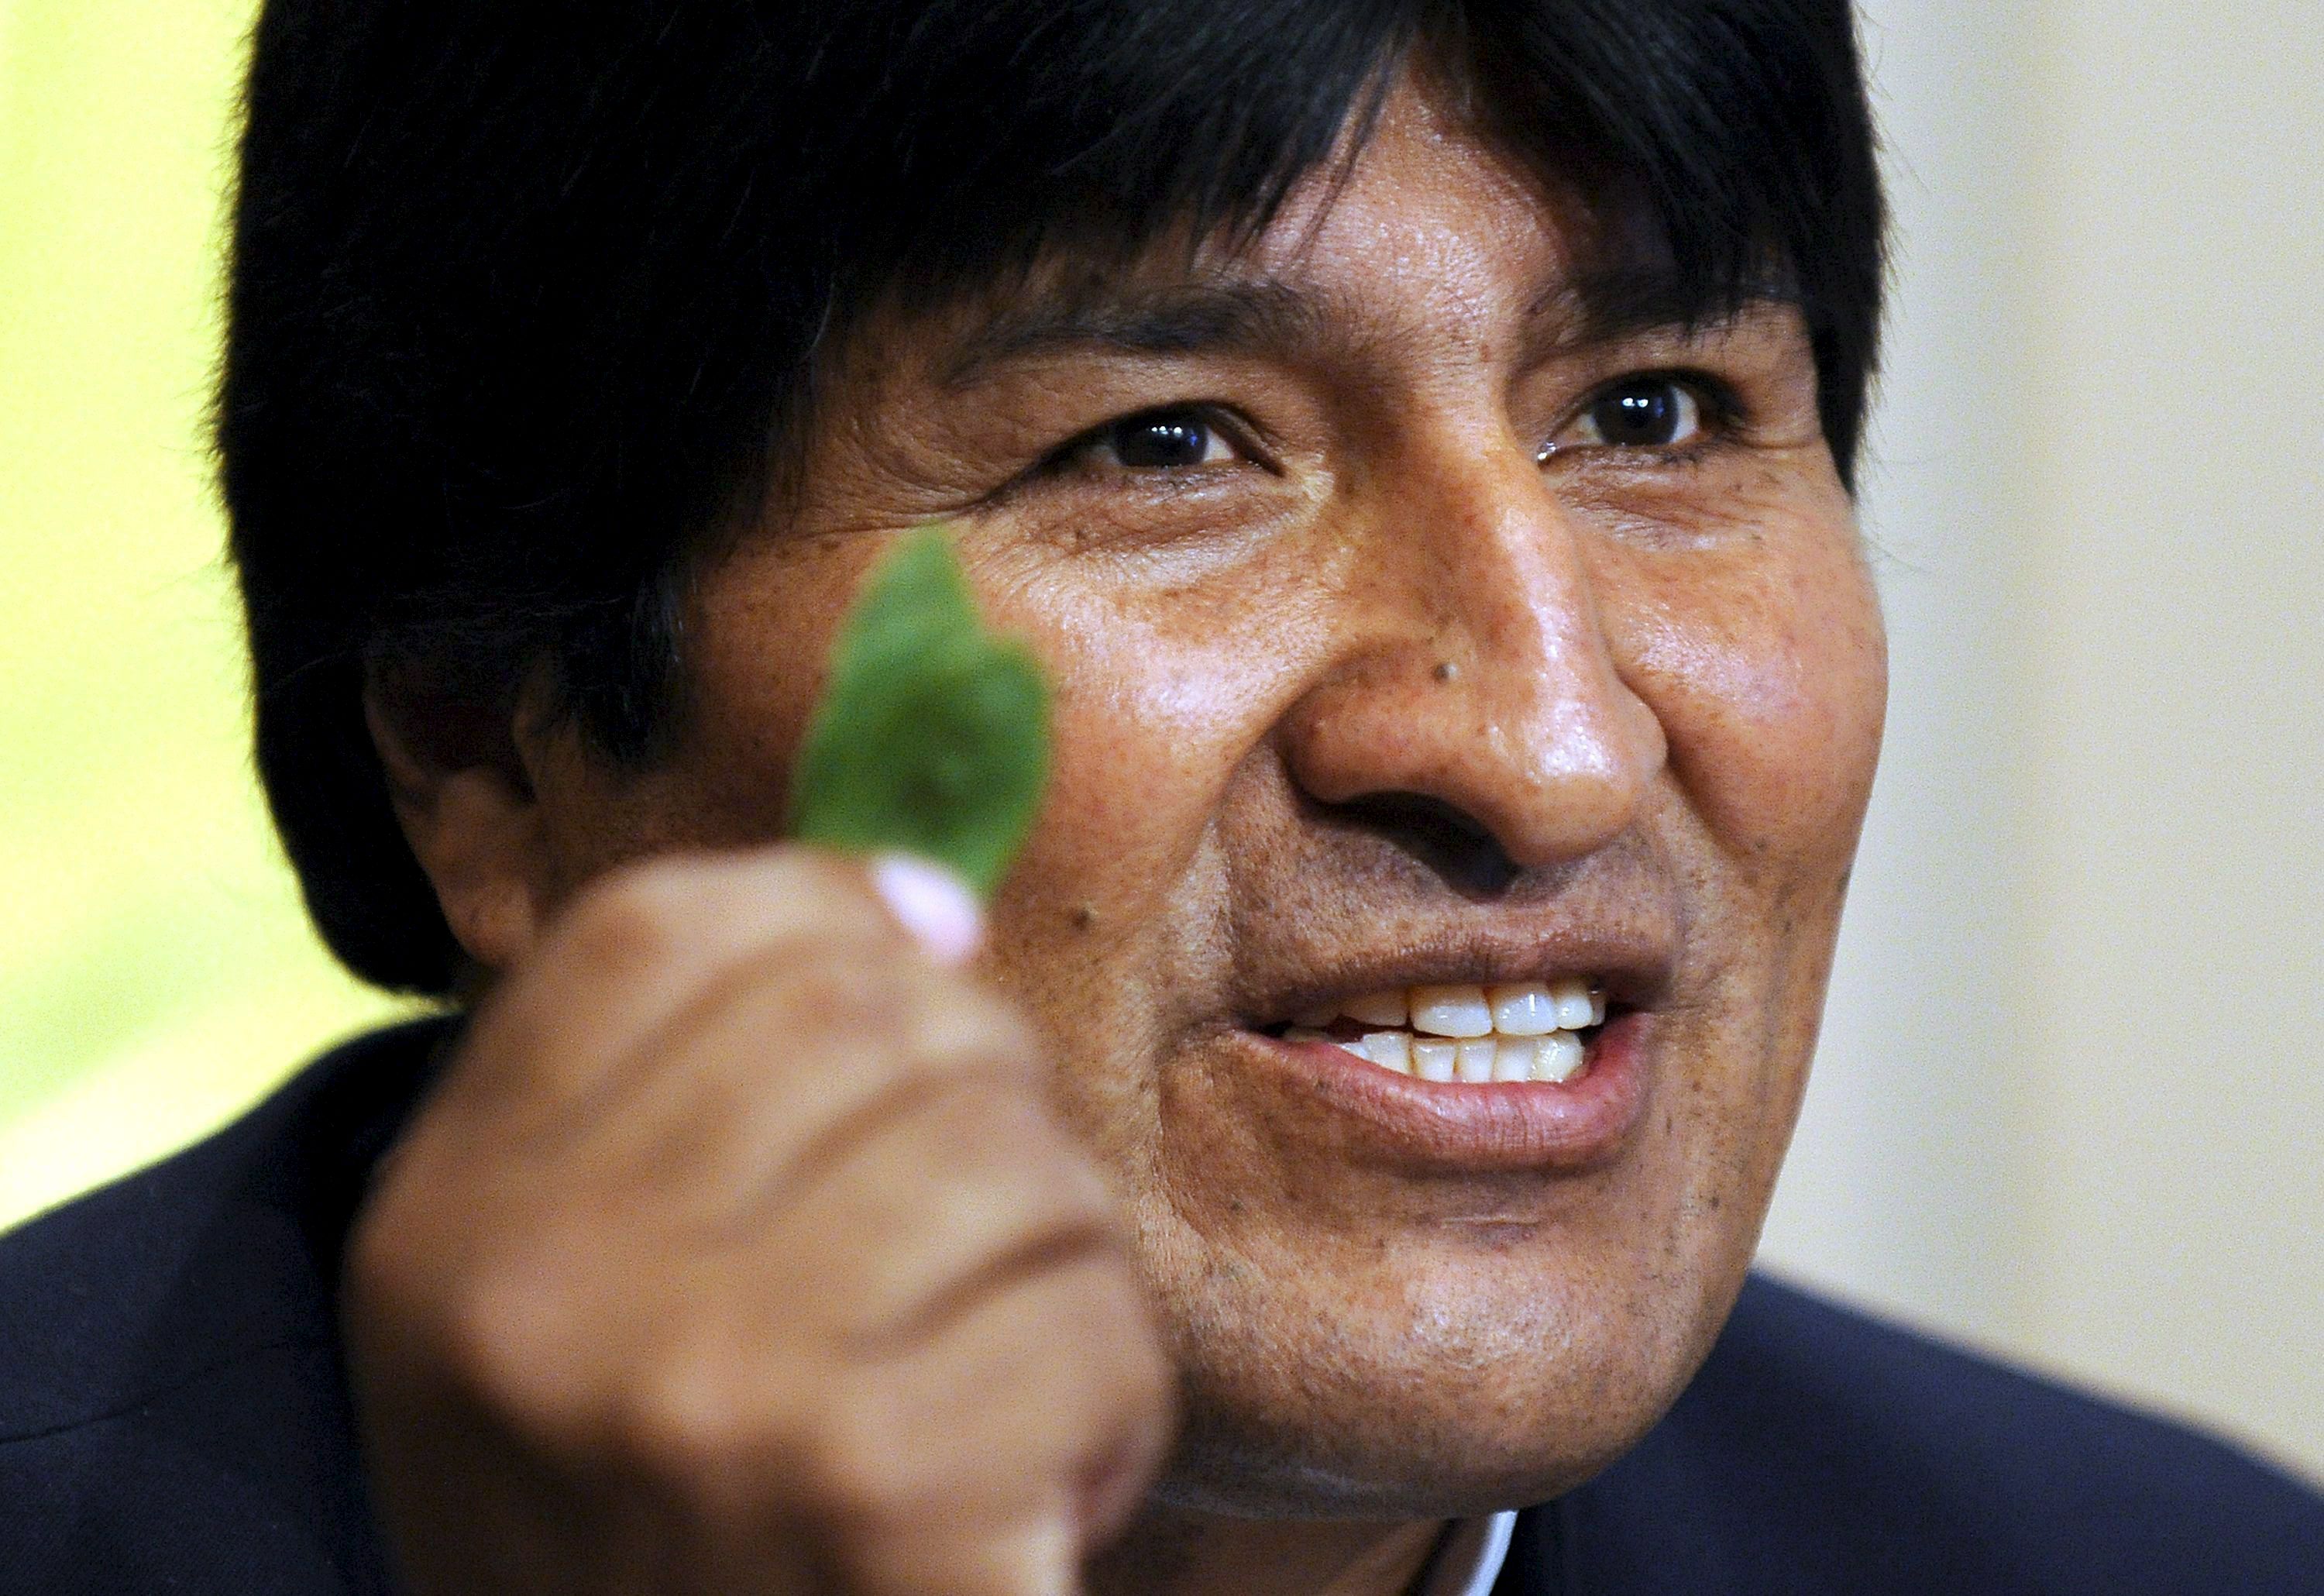 President Evo Morales was leader of the cocalero union before being elected.